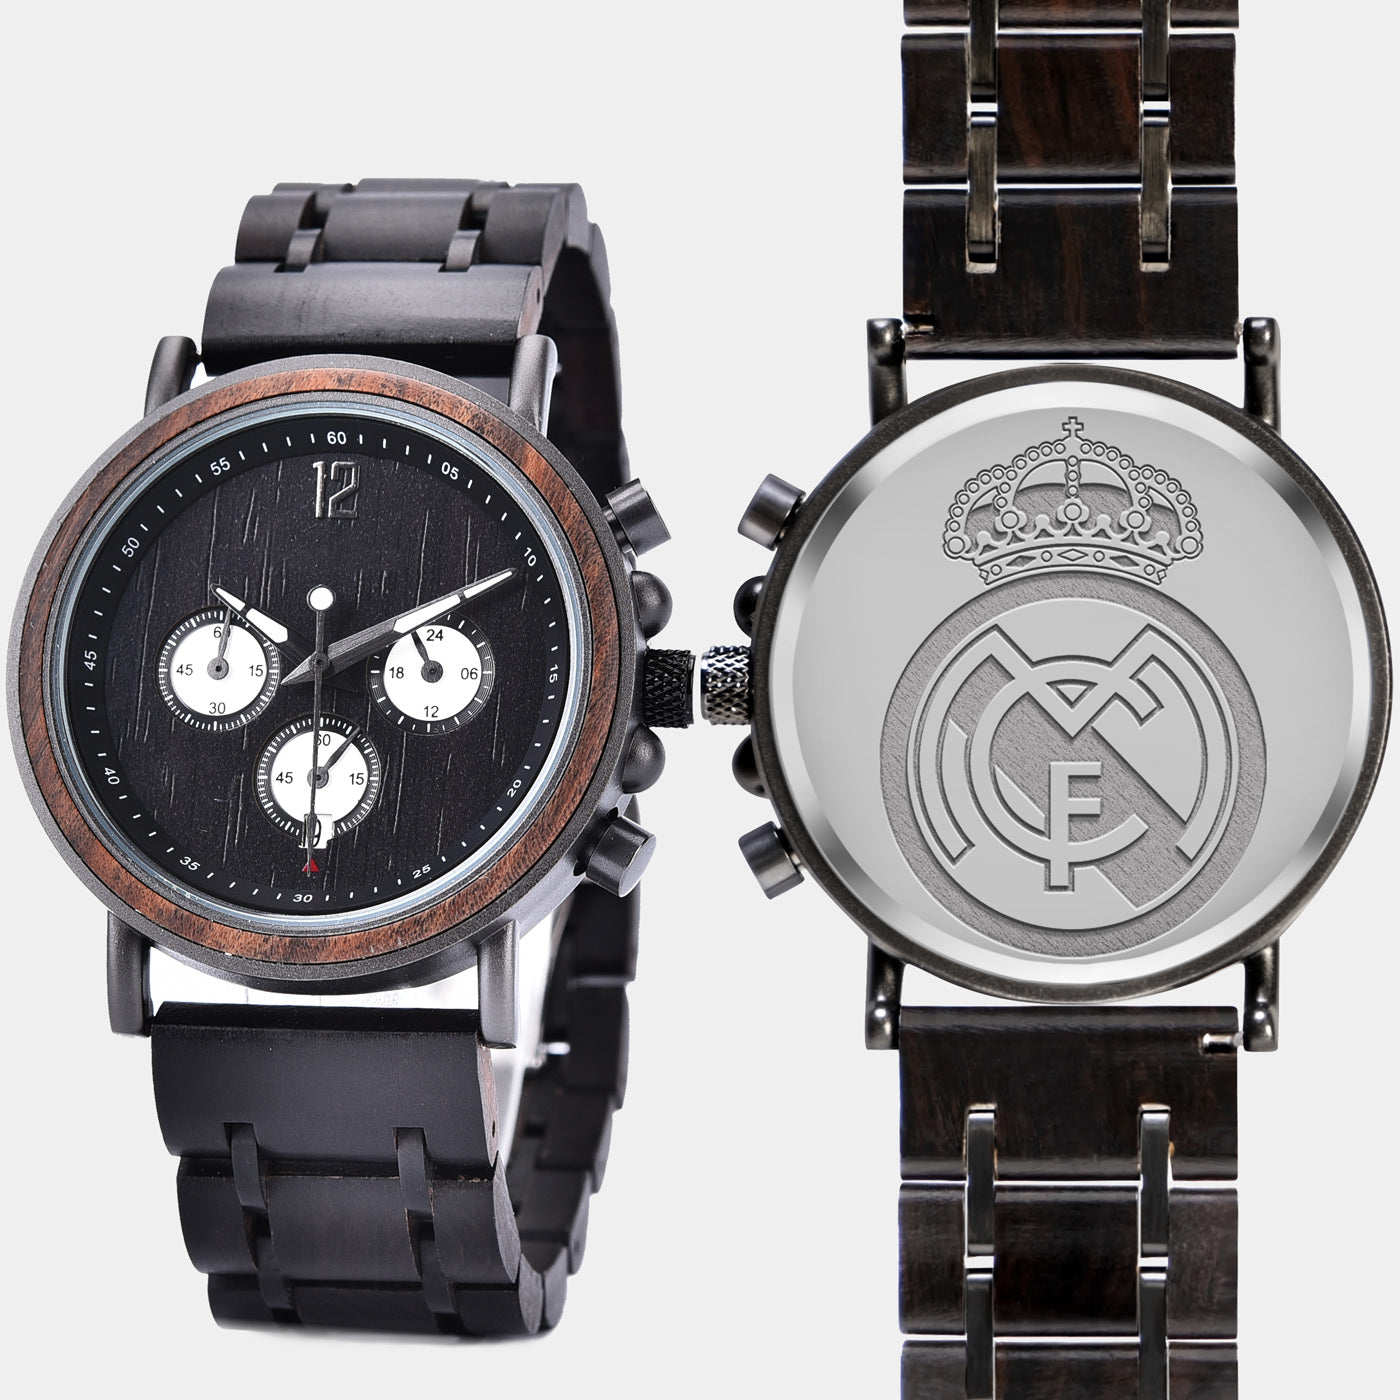 Real Madrid C.F. Mens Wrist Watch  - Personalized Real Madrid C.F. Mens Watches - Custom Gifts For Him, Birthday Gifts, Gift For Dad - Best 2022 Real Madrid C.F. Christmas Gifts - Black 45mm FC Wood Watch